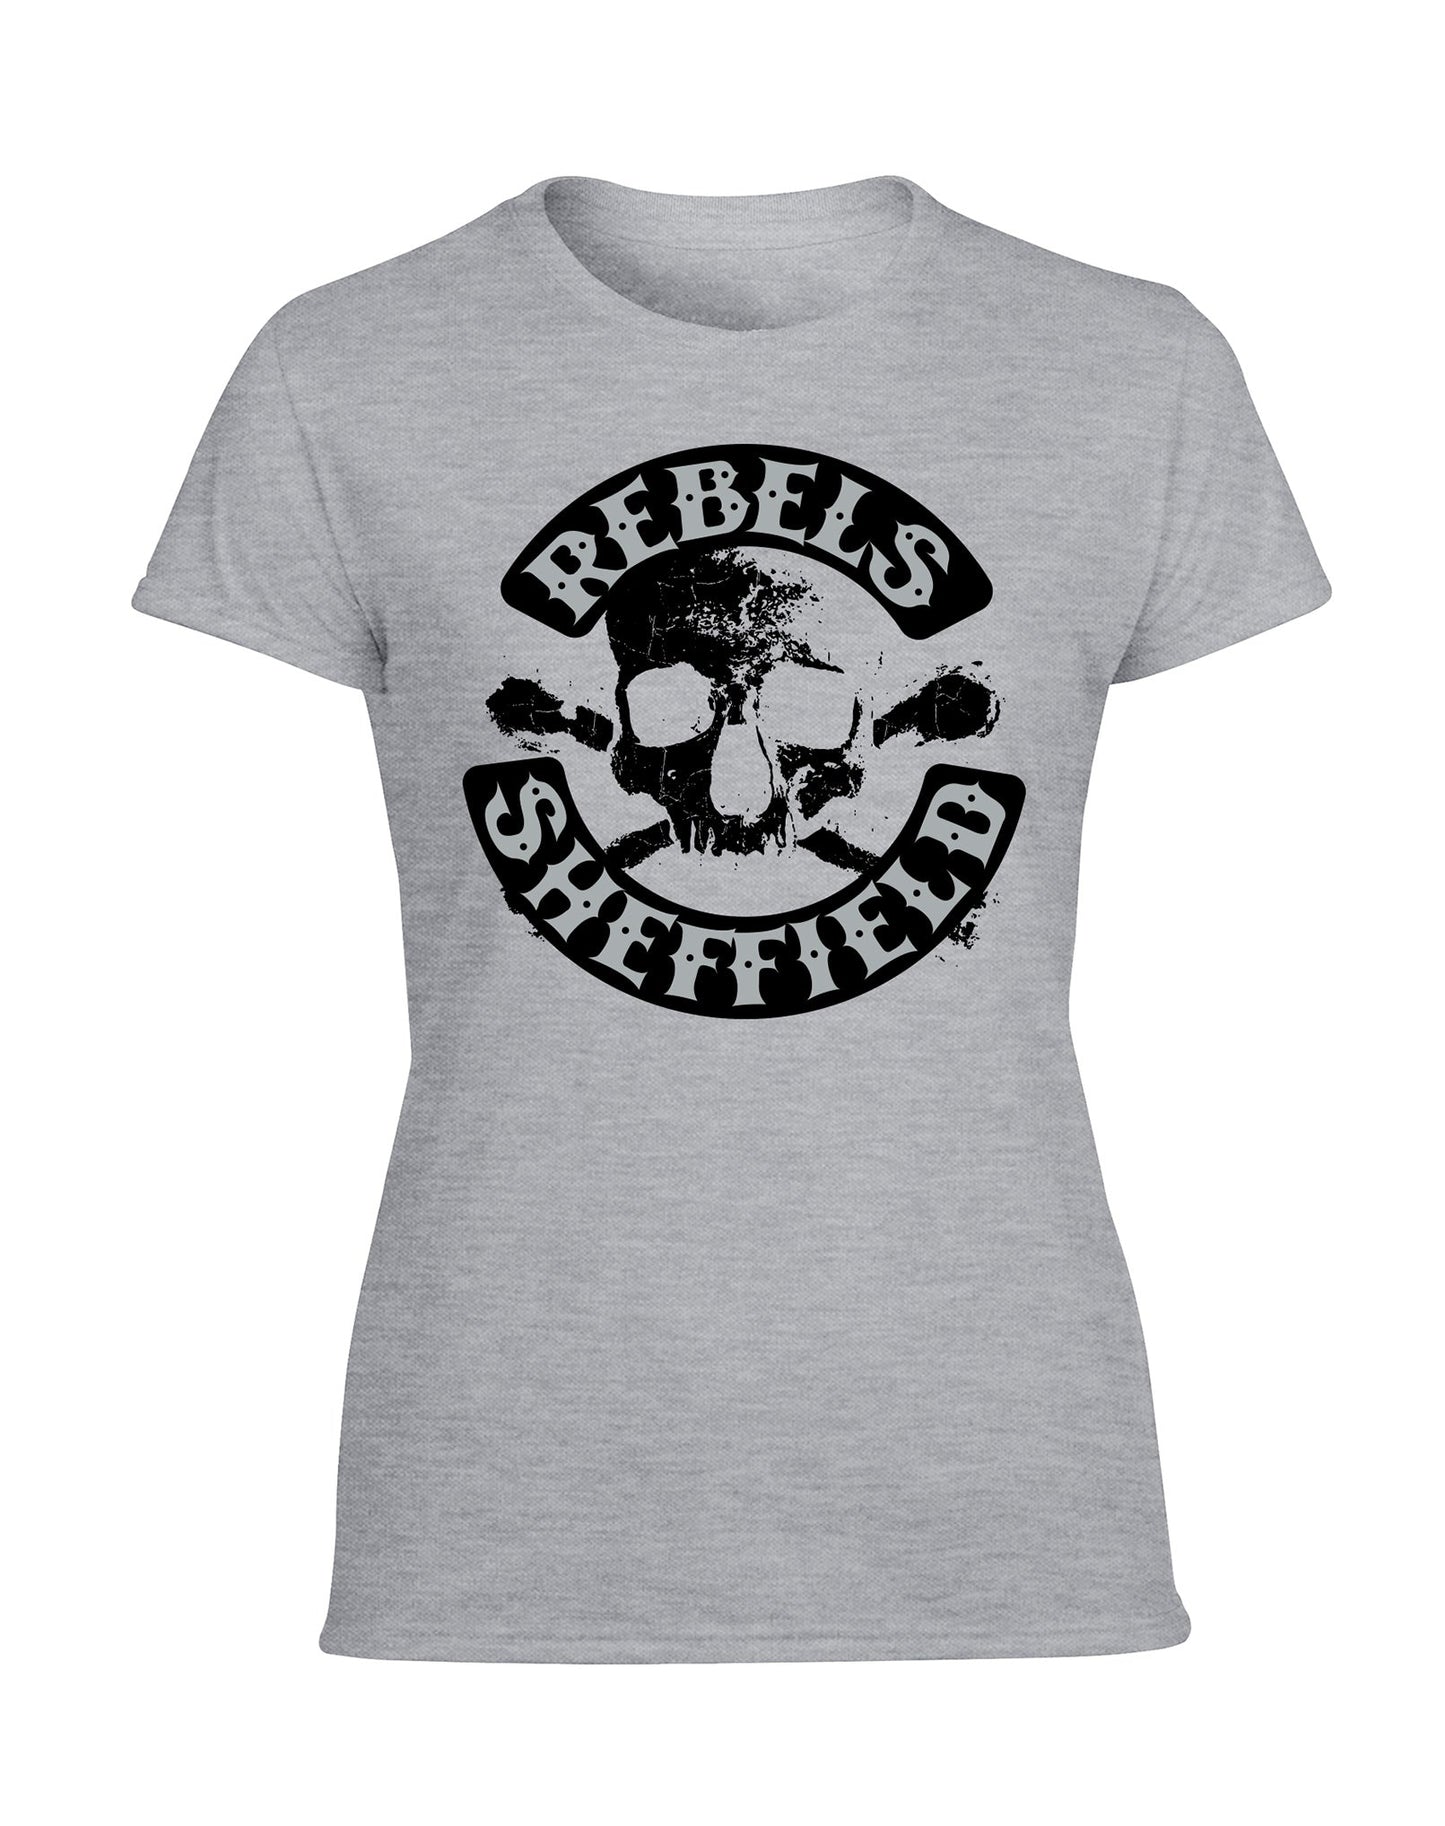 Rebels Skull ladies fit T-shirt - various colours - Dirty Stop Outs